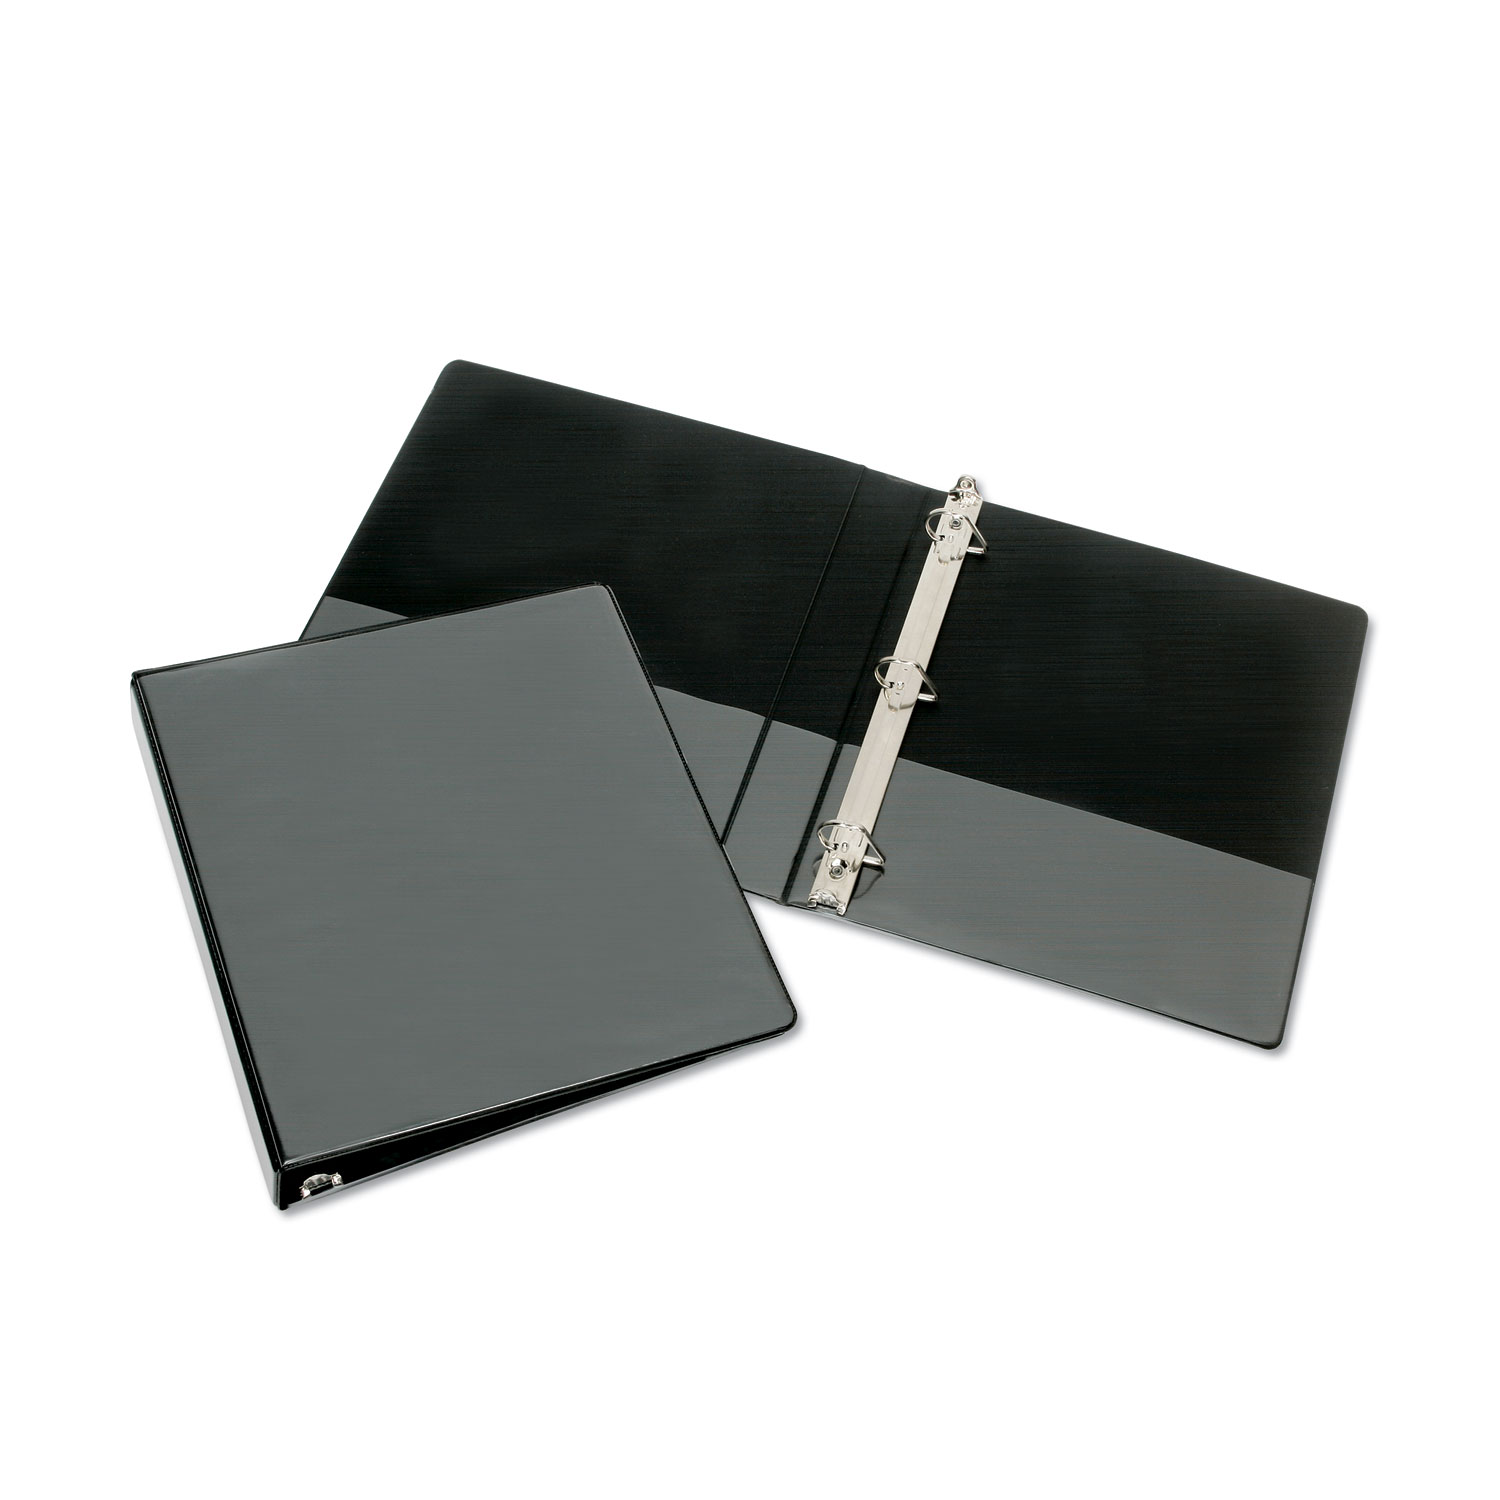 Presentation Covers, Clear View & Black Binding Covers